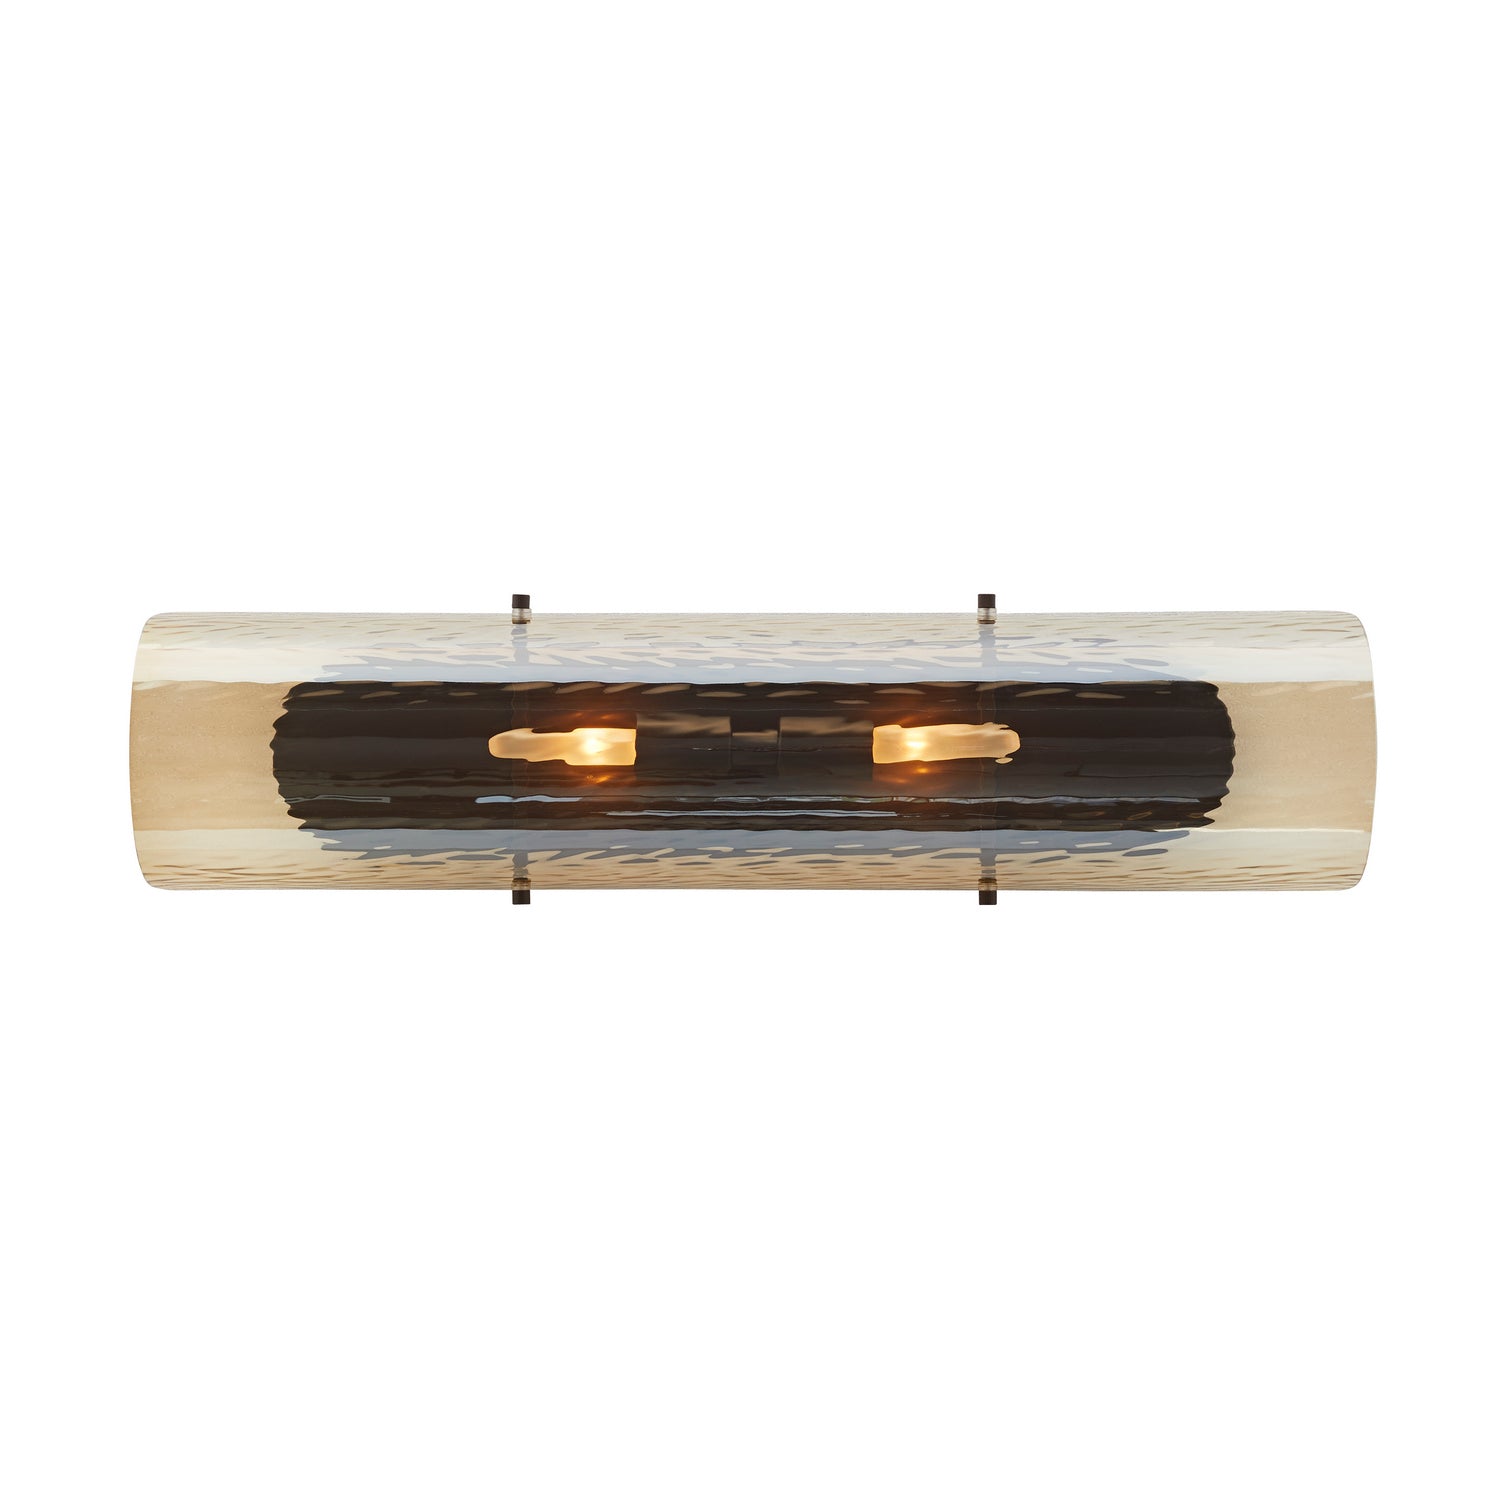 Two Light Wall Sconce from the Bend collection in Amber finish